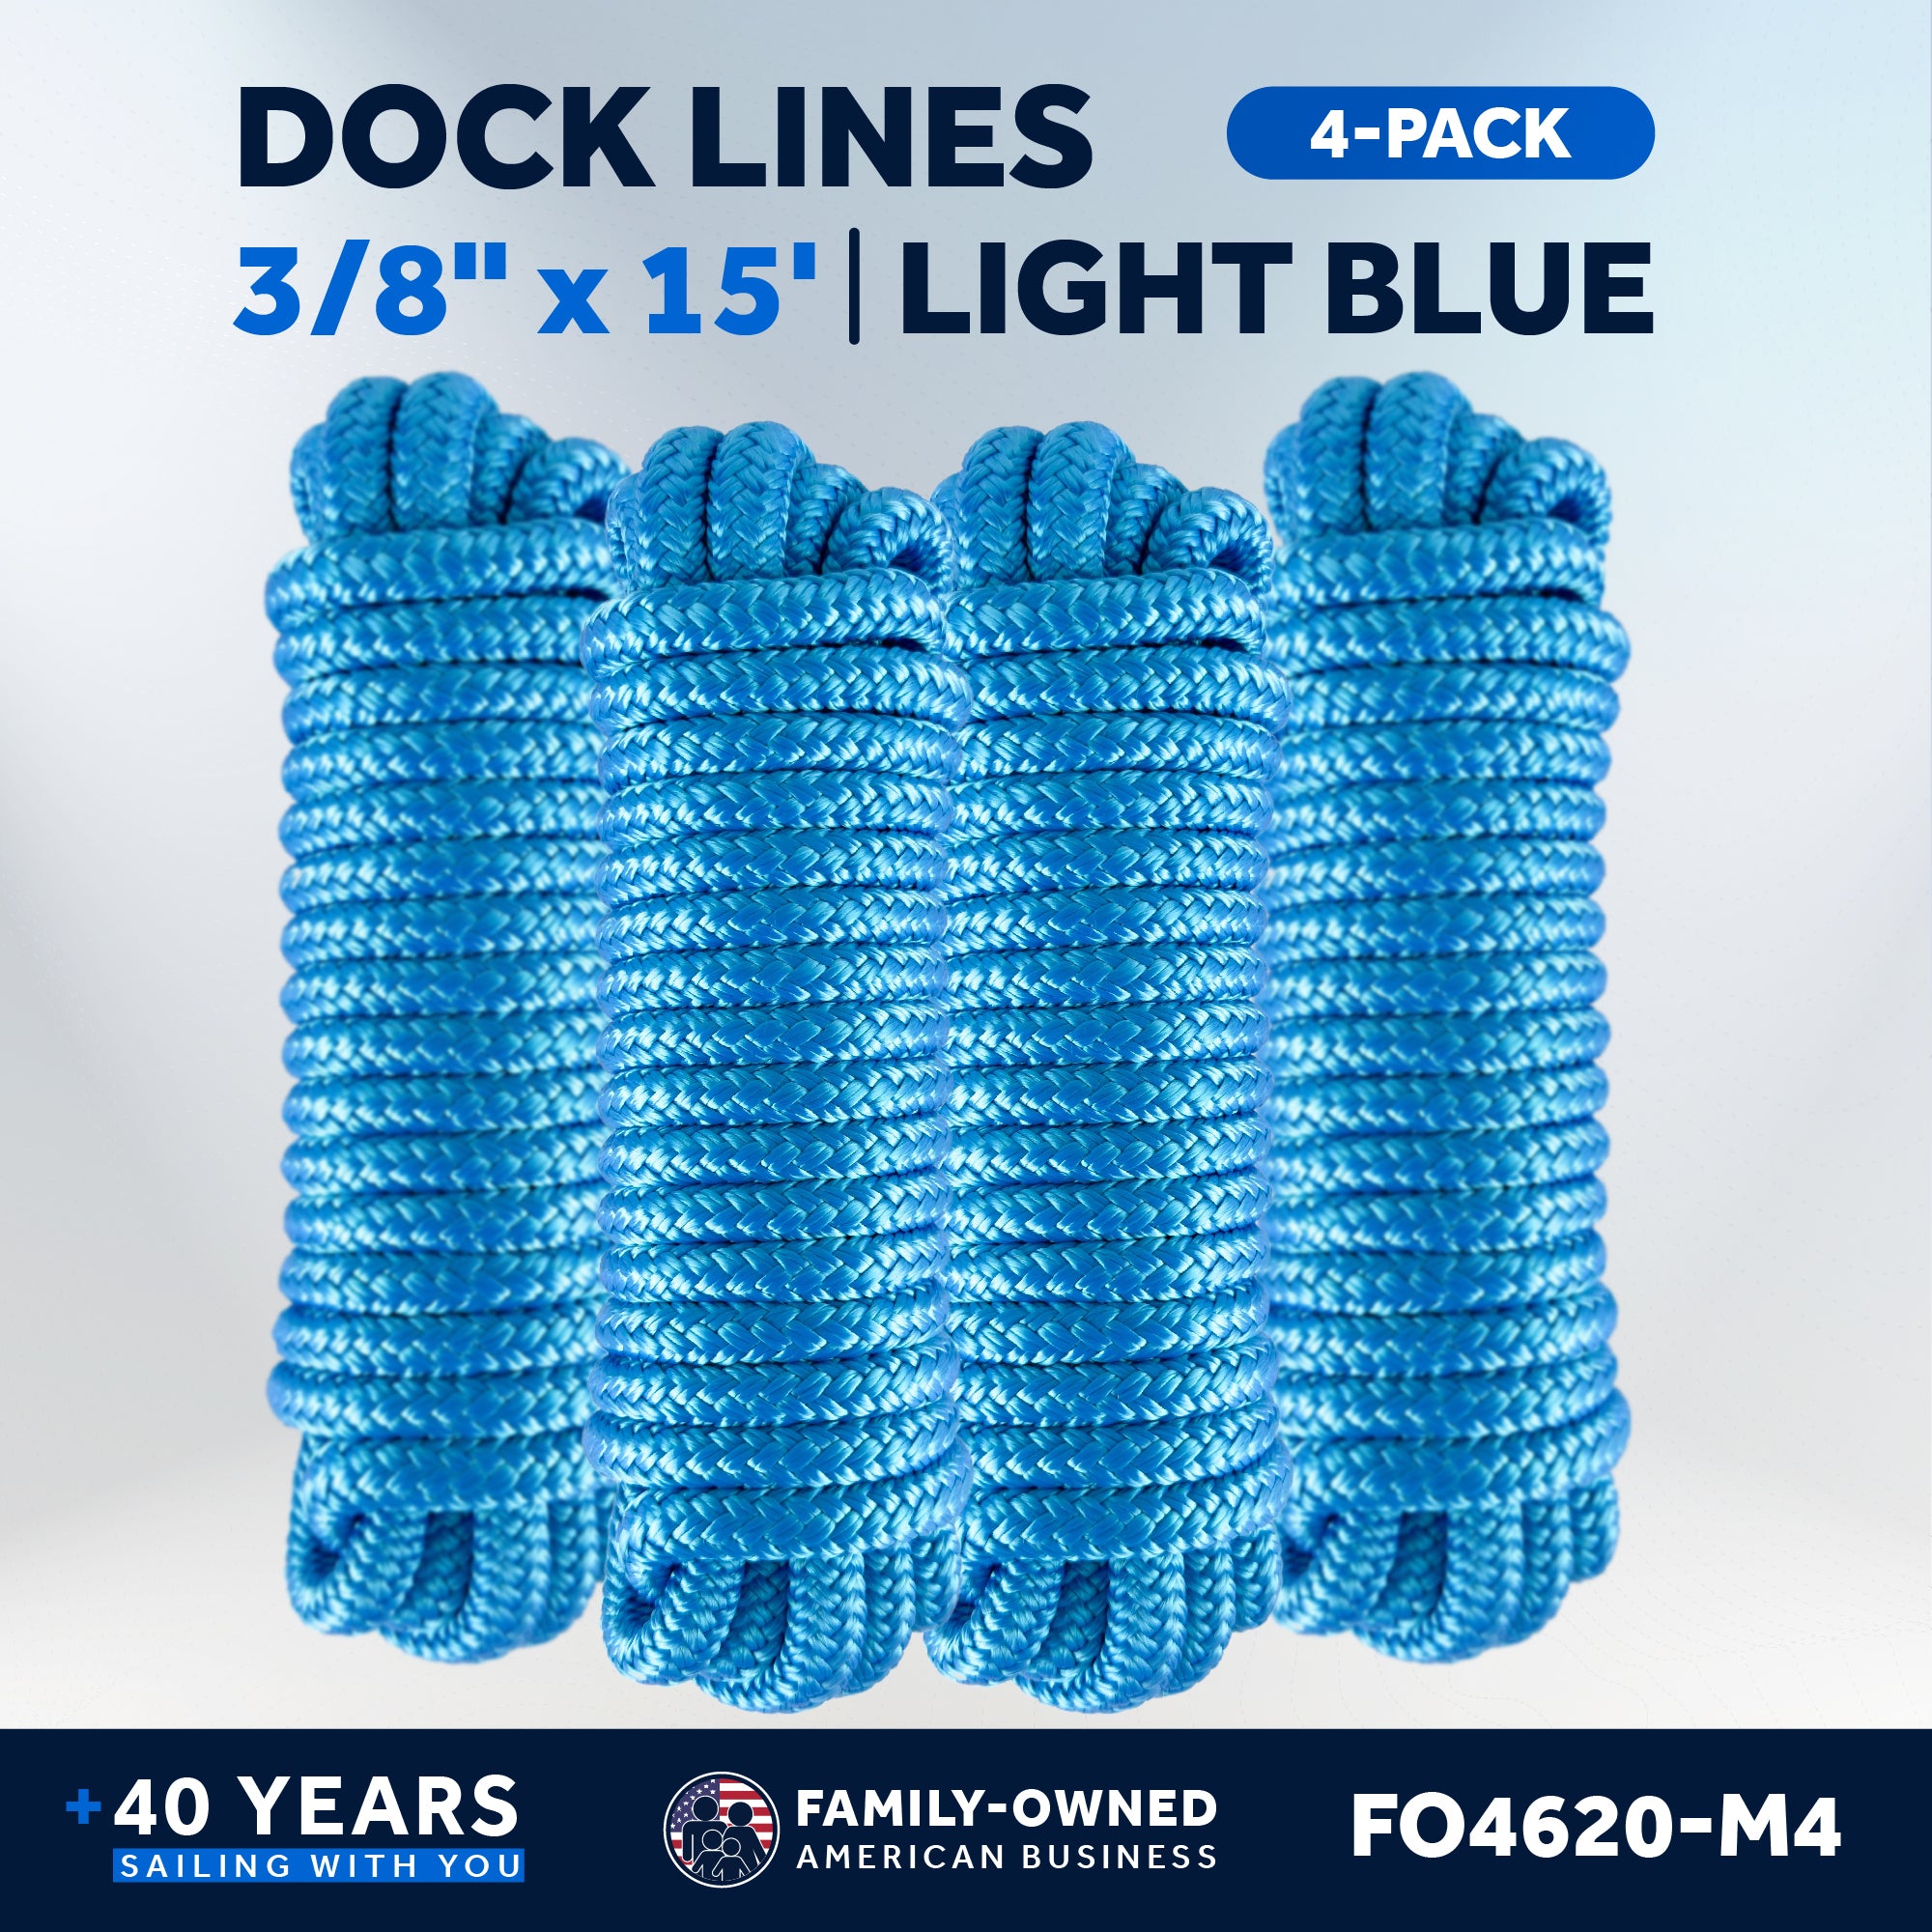 Dock Lines, 3/8" x 15', Light Blue Nylon Double Braided with 12" Eyelet, 4-Pack - FO4620-M4